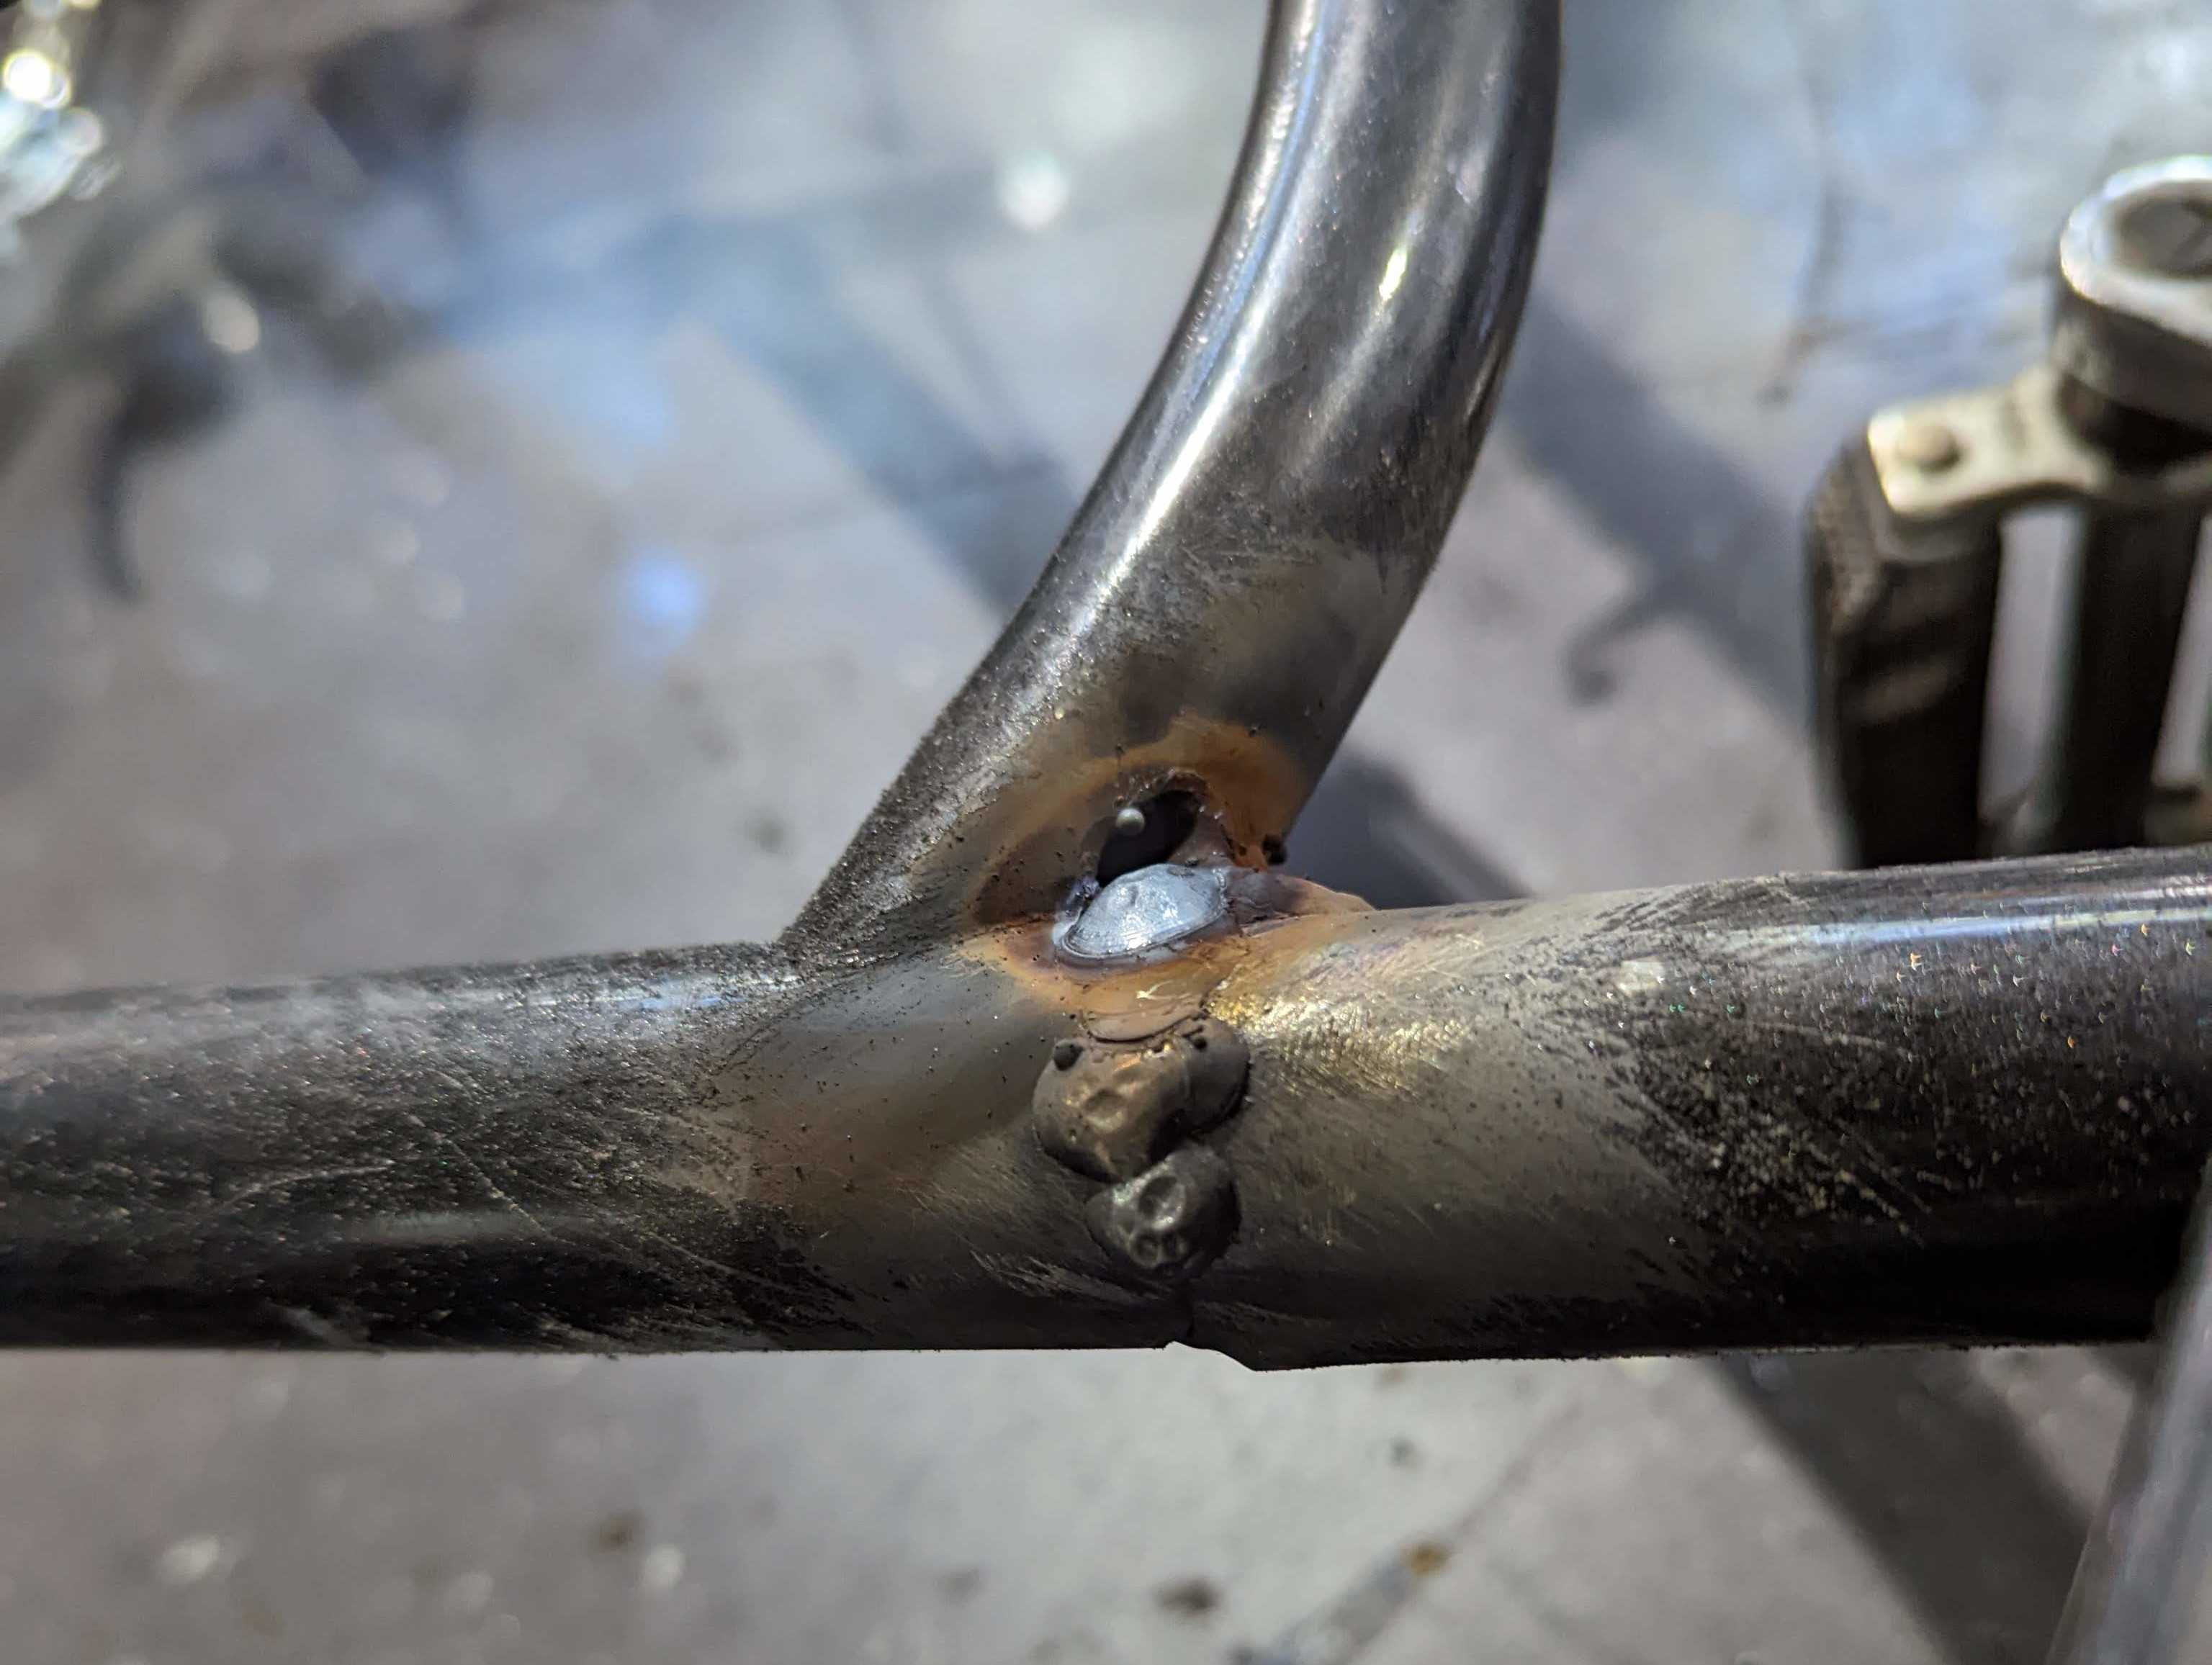 The hole created during the welding.